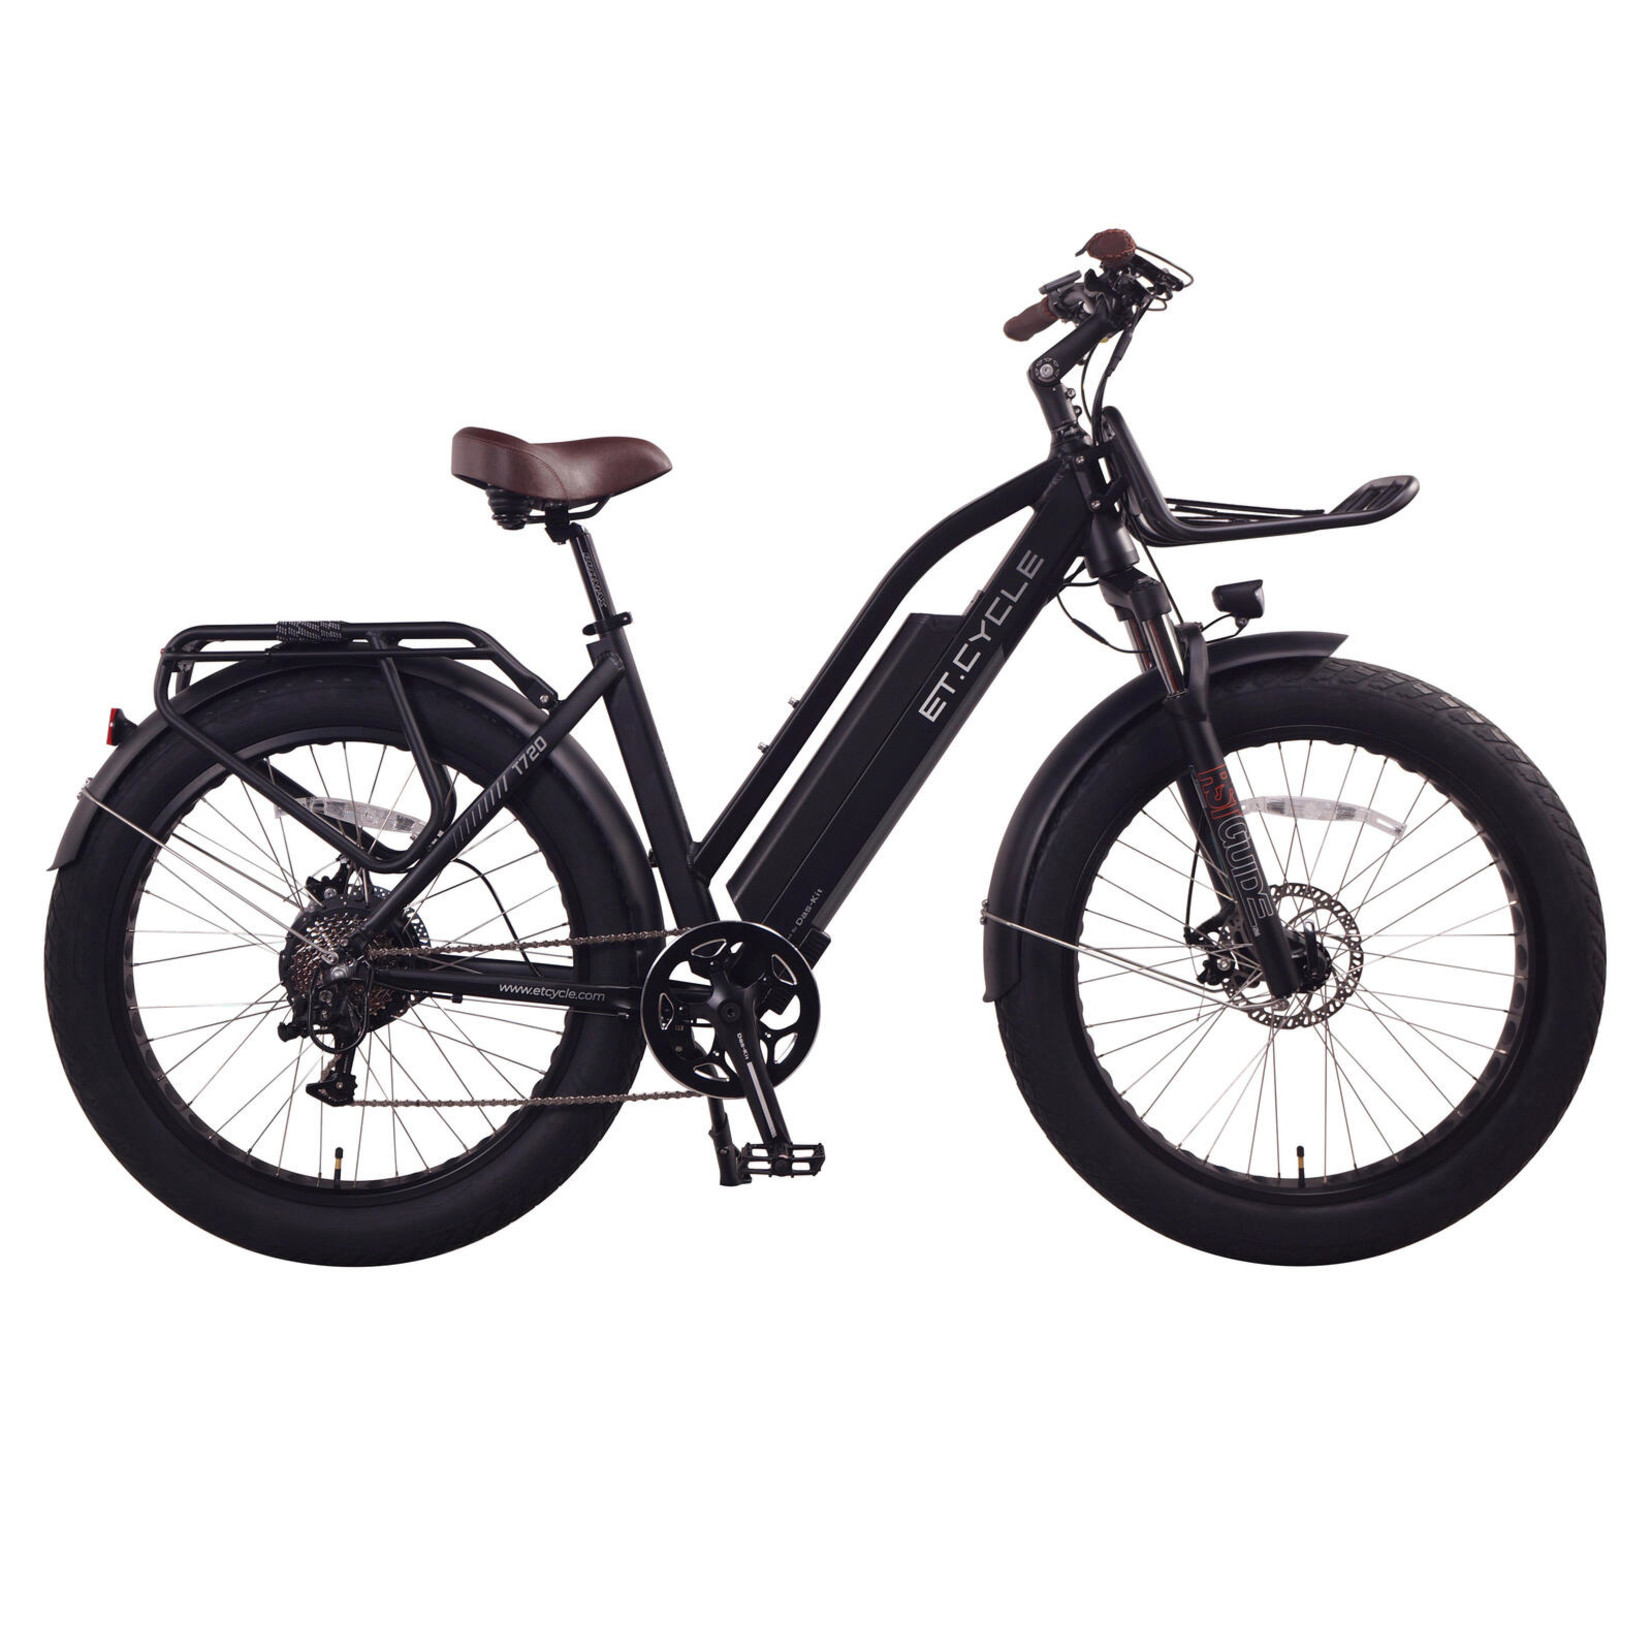 Leon Cycle ET. Cycle T720 Electric Fat Tire Bike